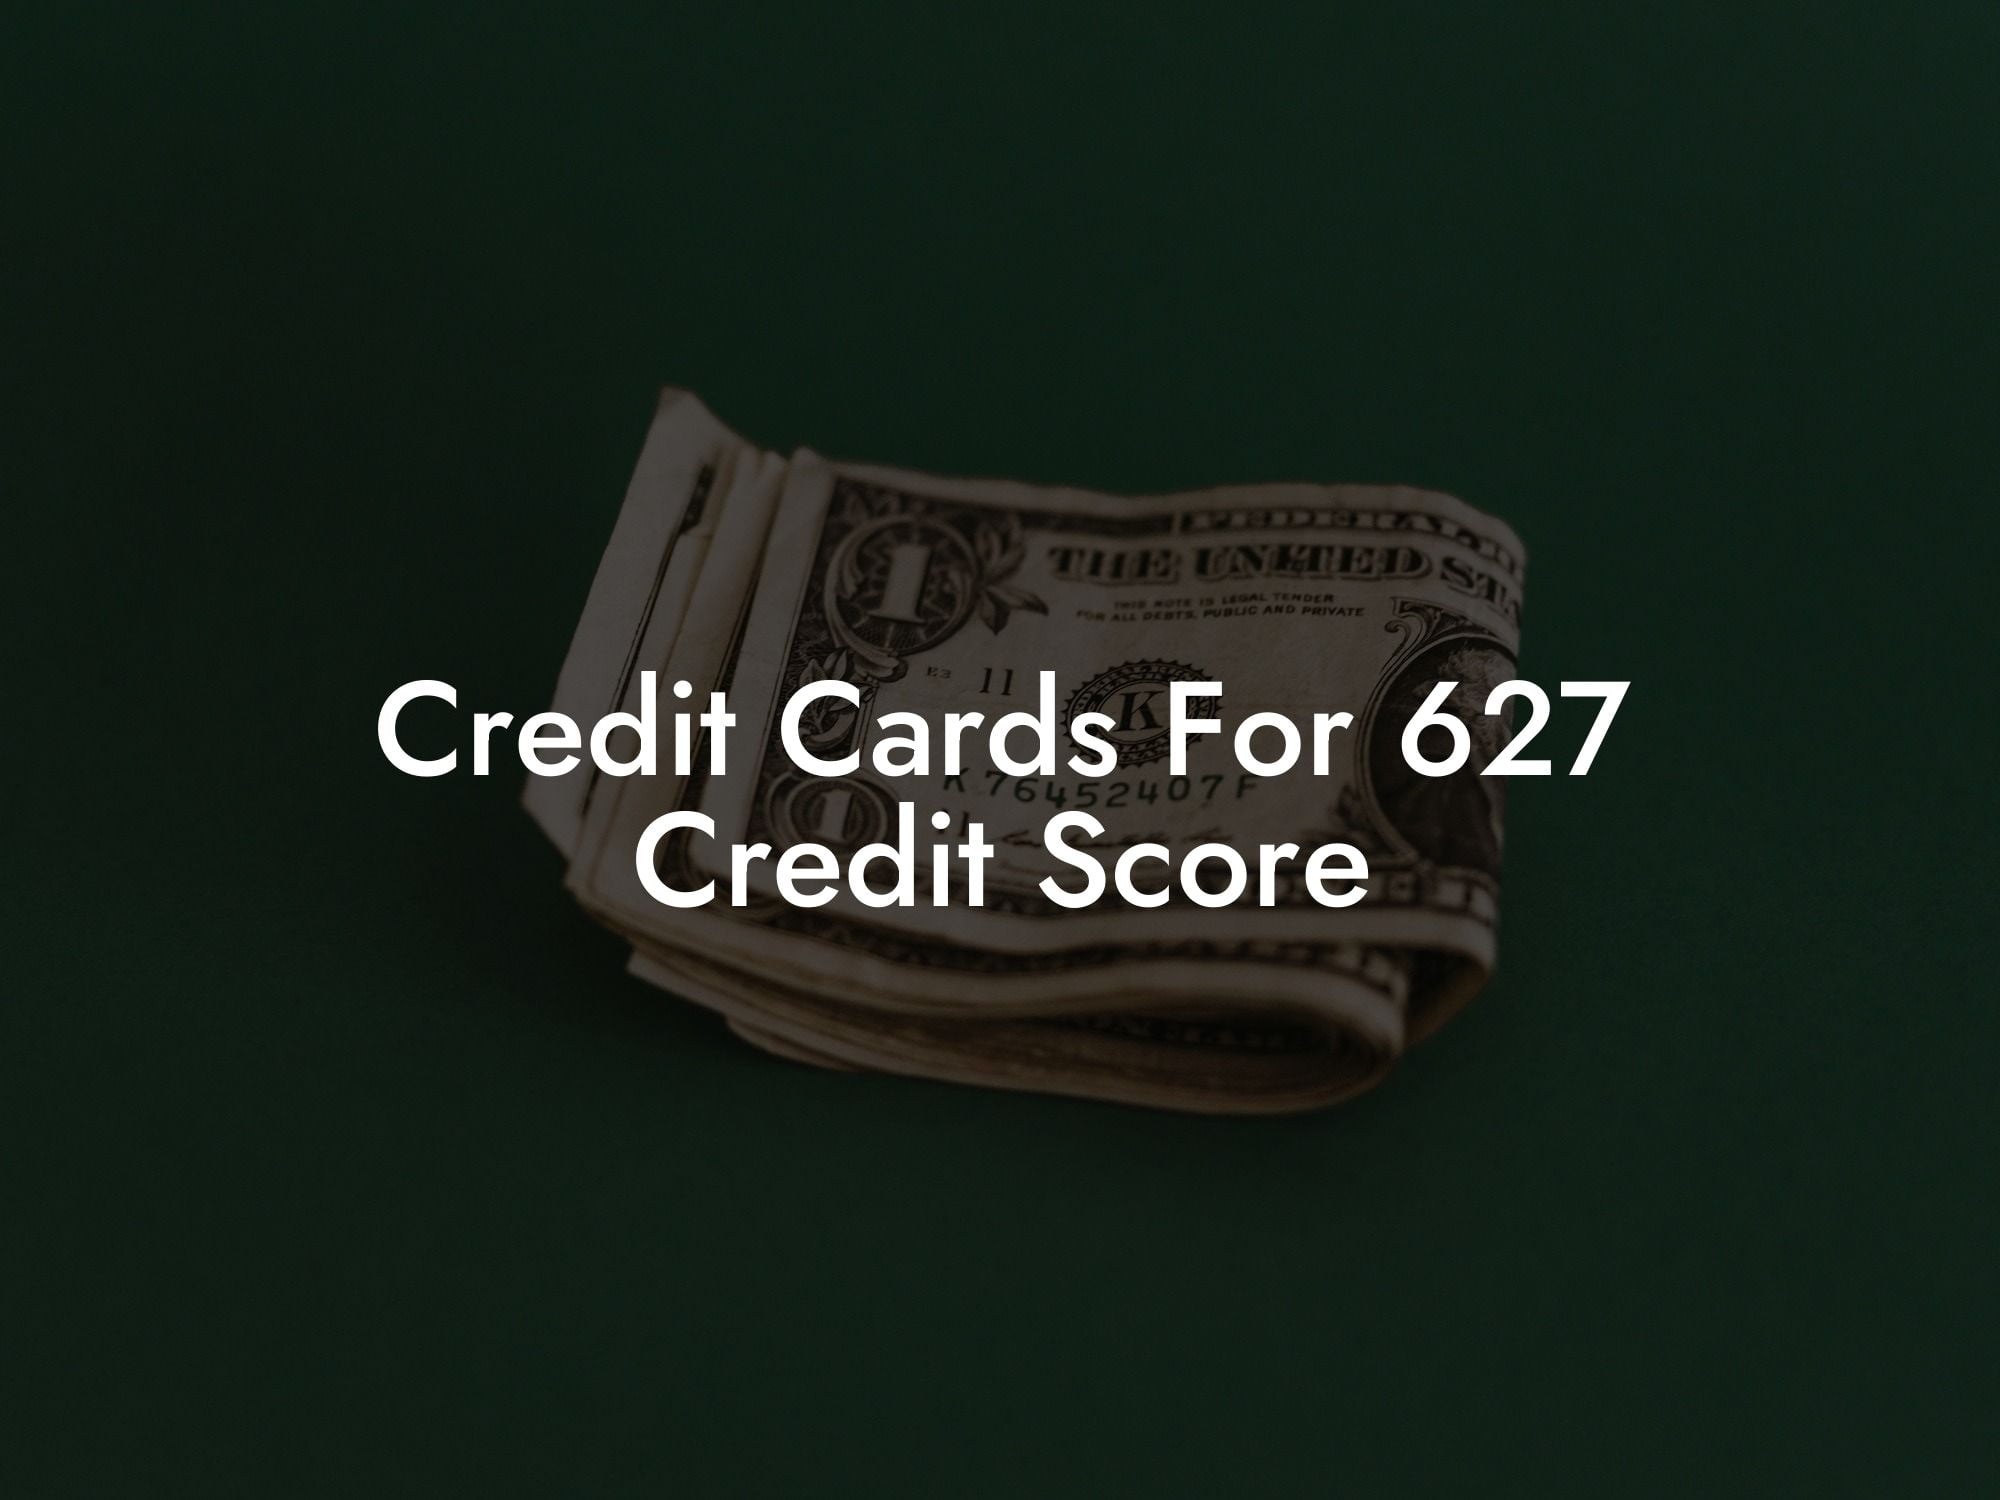 Credit Cards For 627 Credit Score